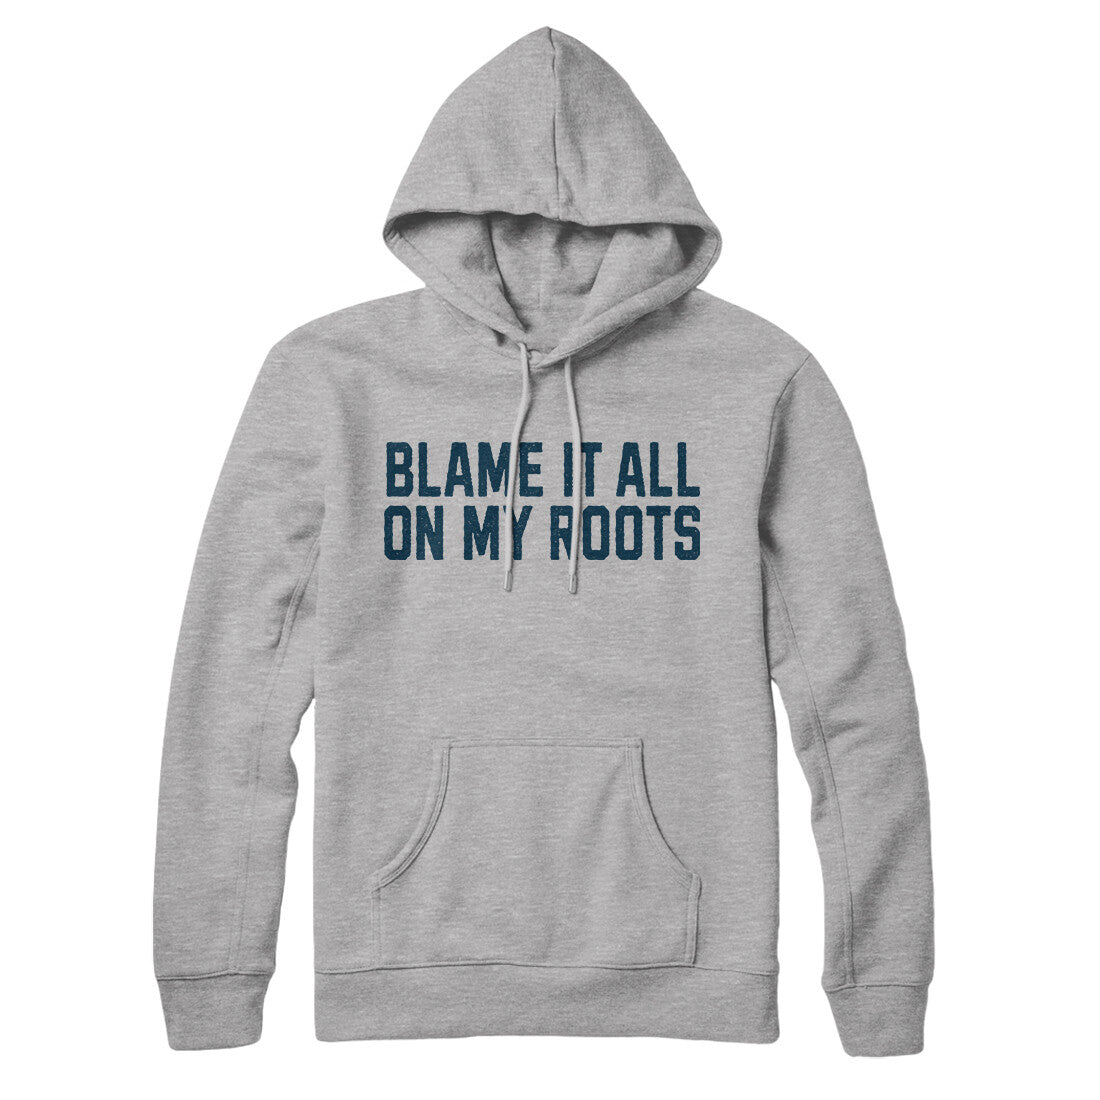 Blame it All on my Roots in Heather Grey Color